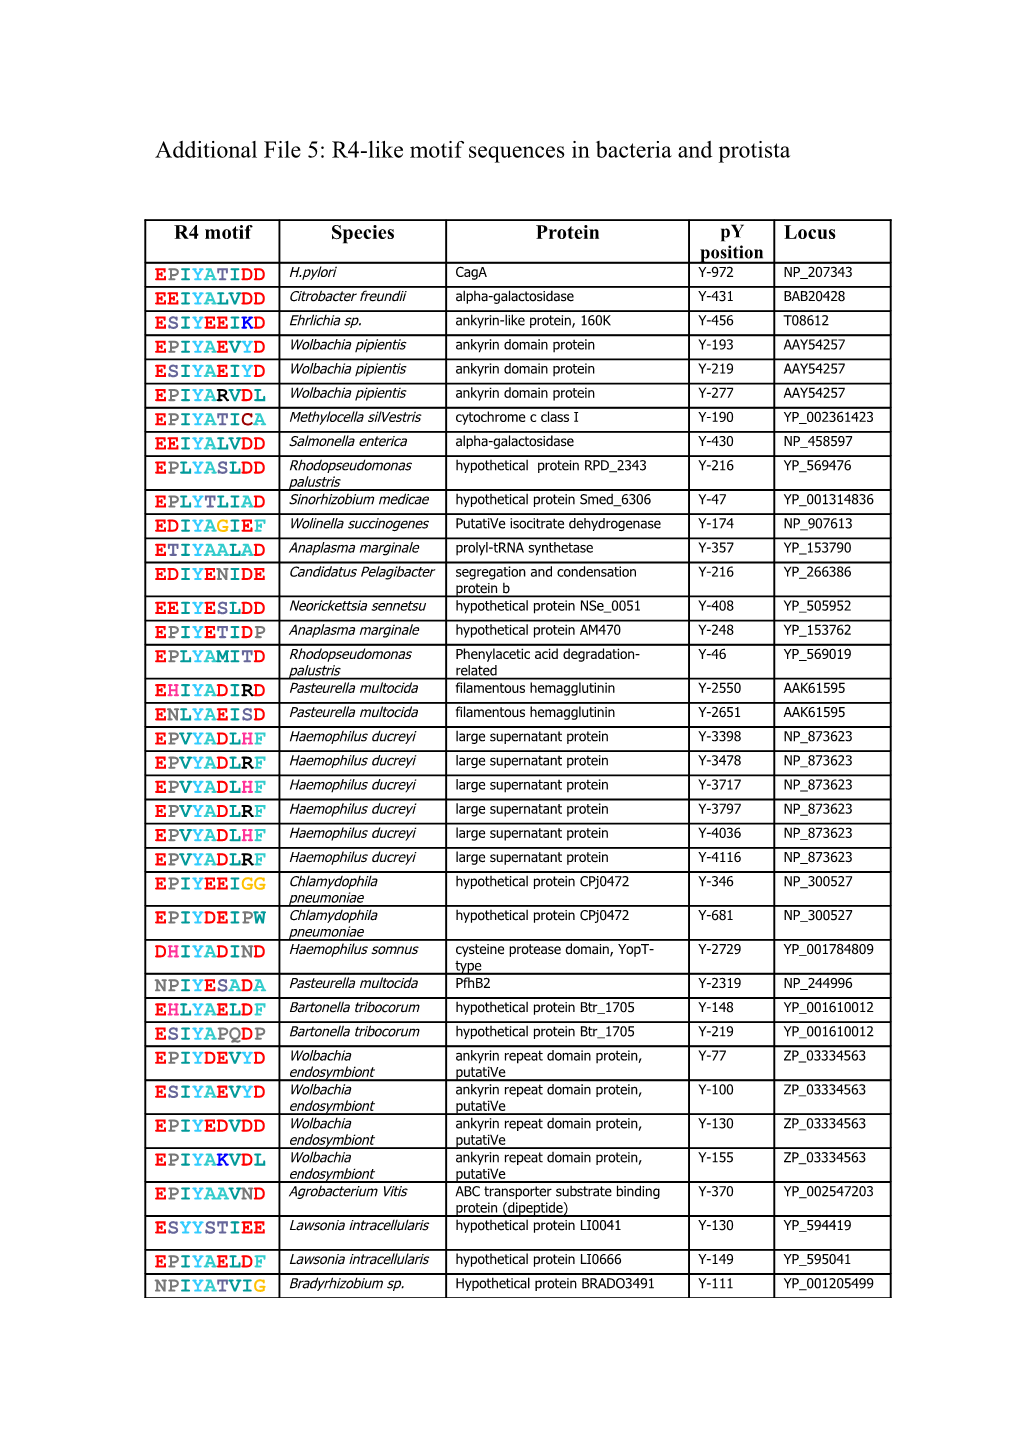 Additional File 5: R4-Like Motif Sequences Inbacteria and Protista